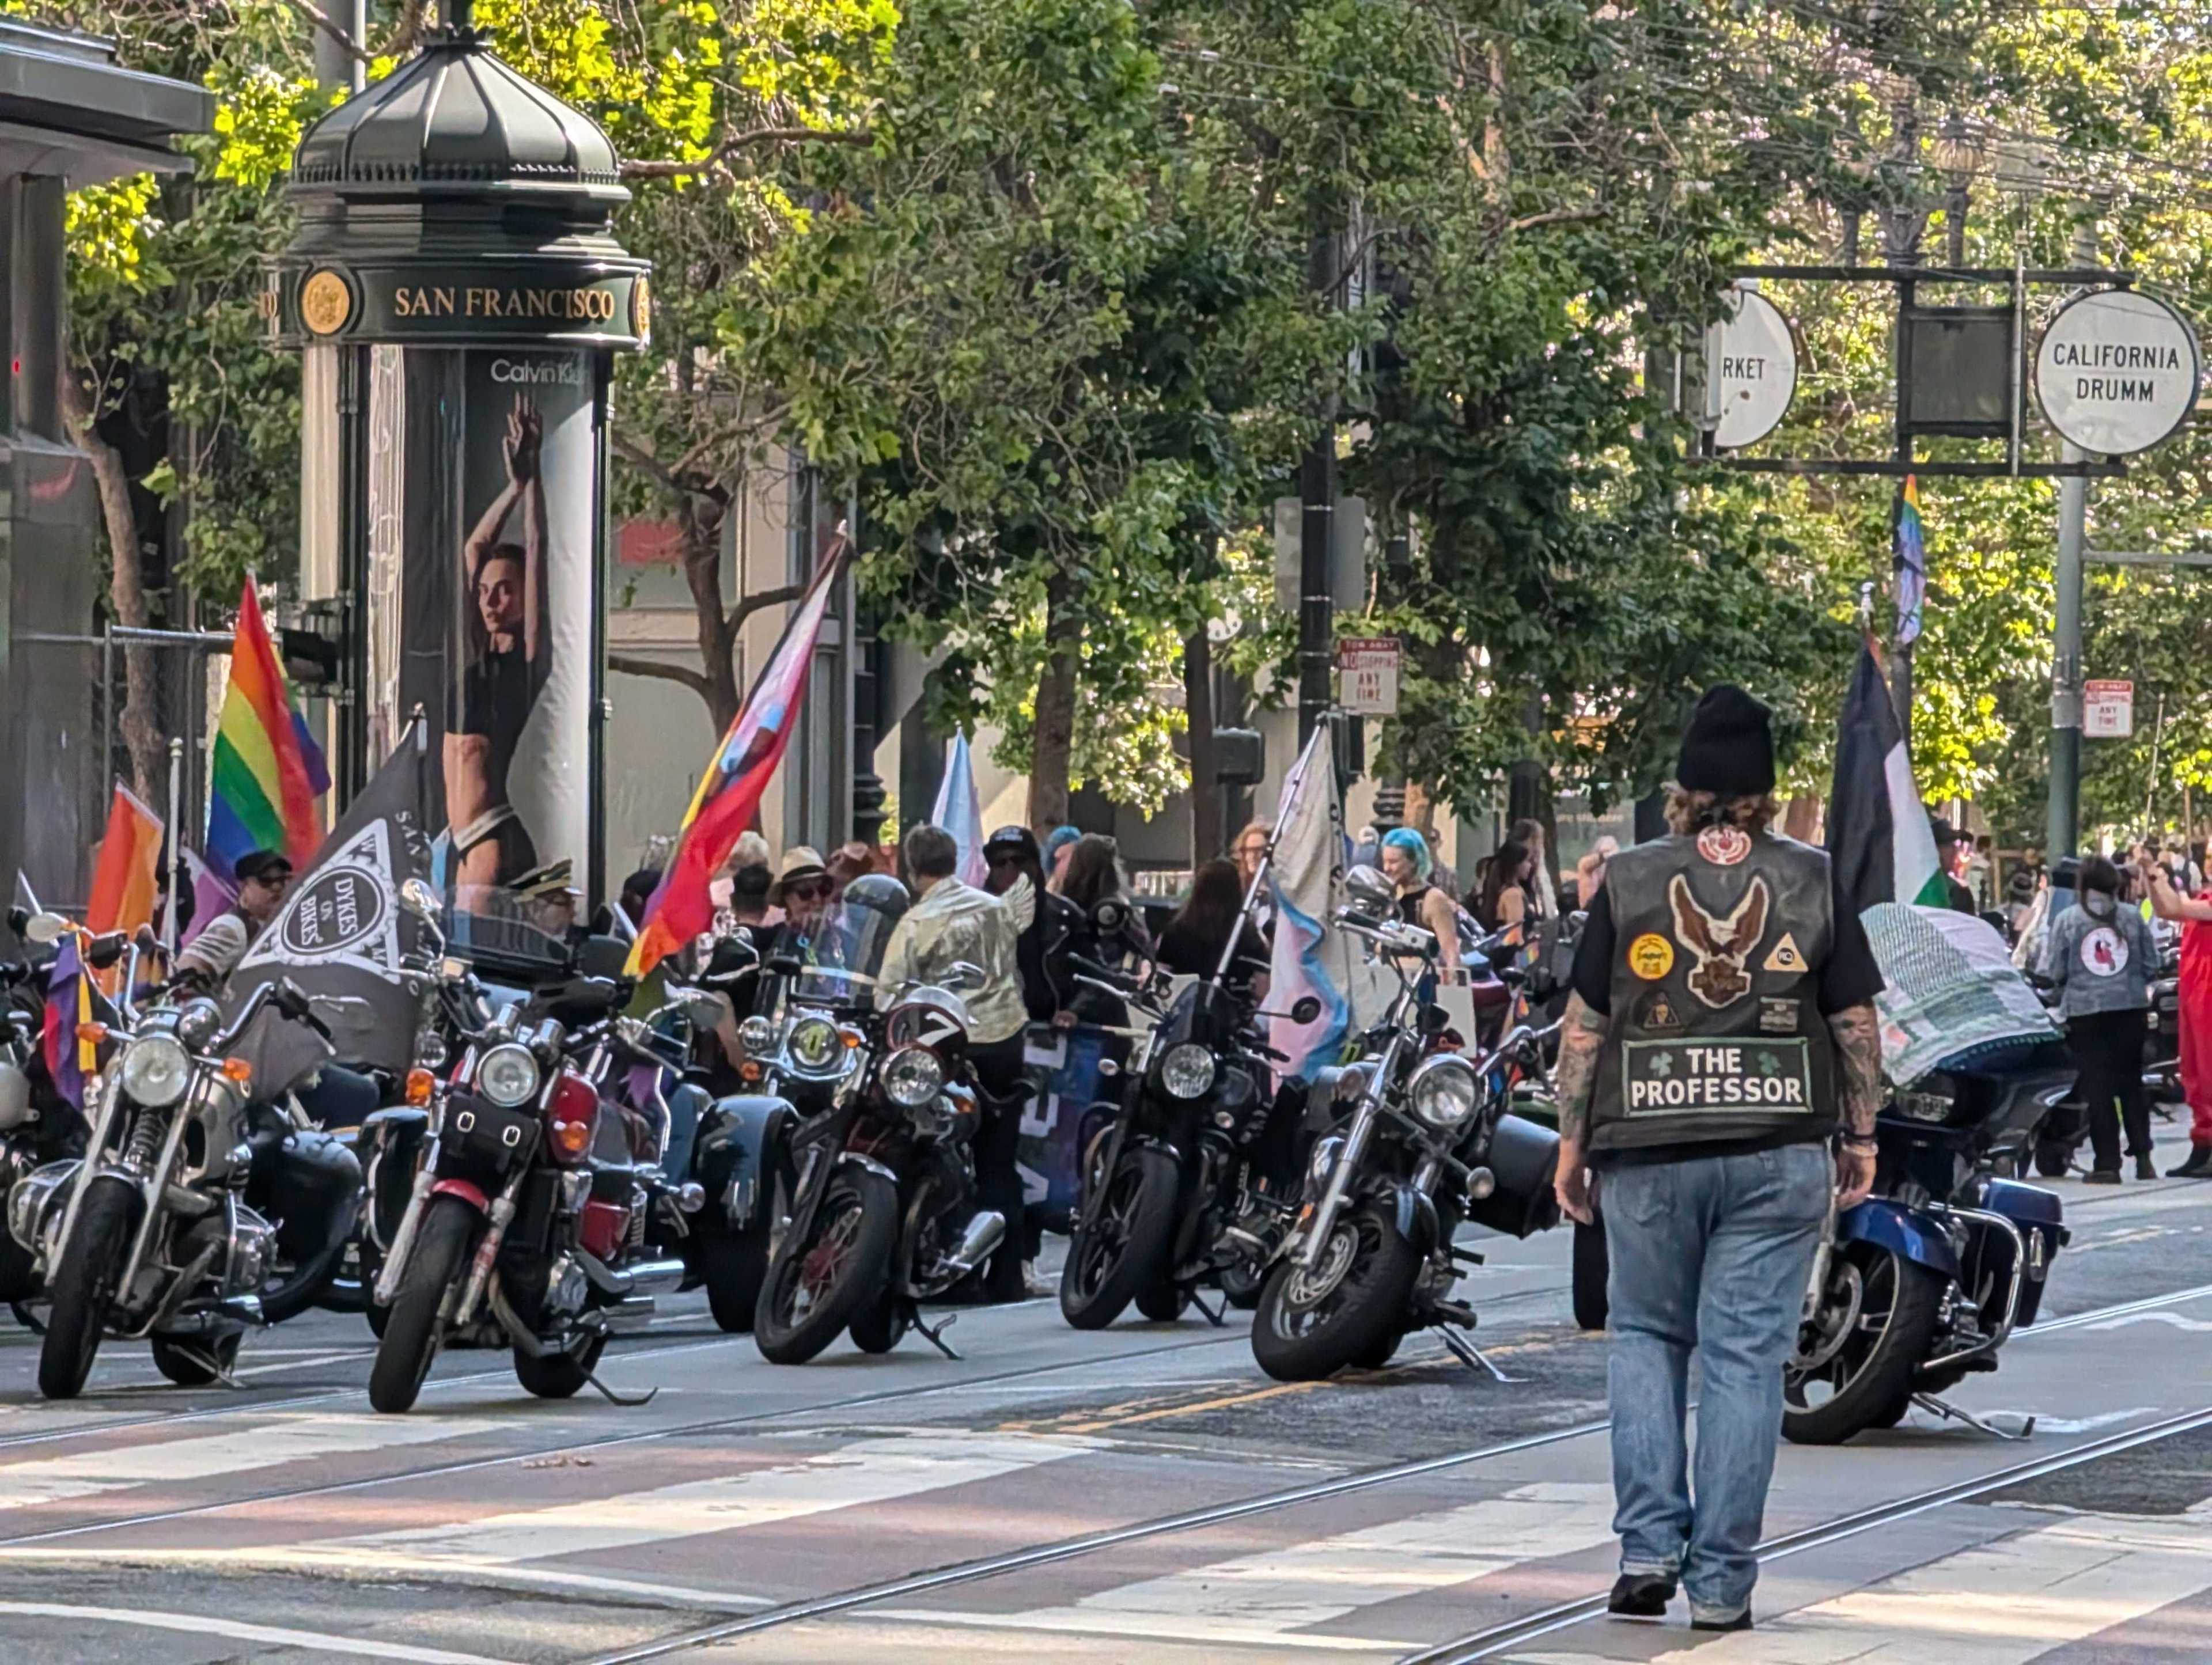 A group of motorcyclists with various flags gathers on a San Francisco street. A person with a beanie, jeans, and a patched vest reading &quot;THE PROFESSOR&quot; is in the foreground.